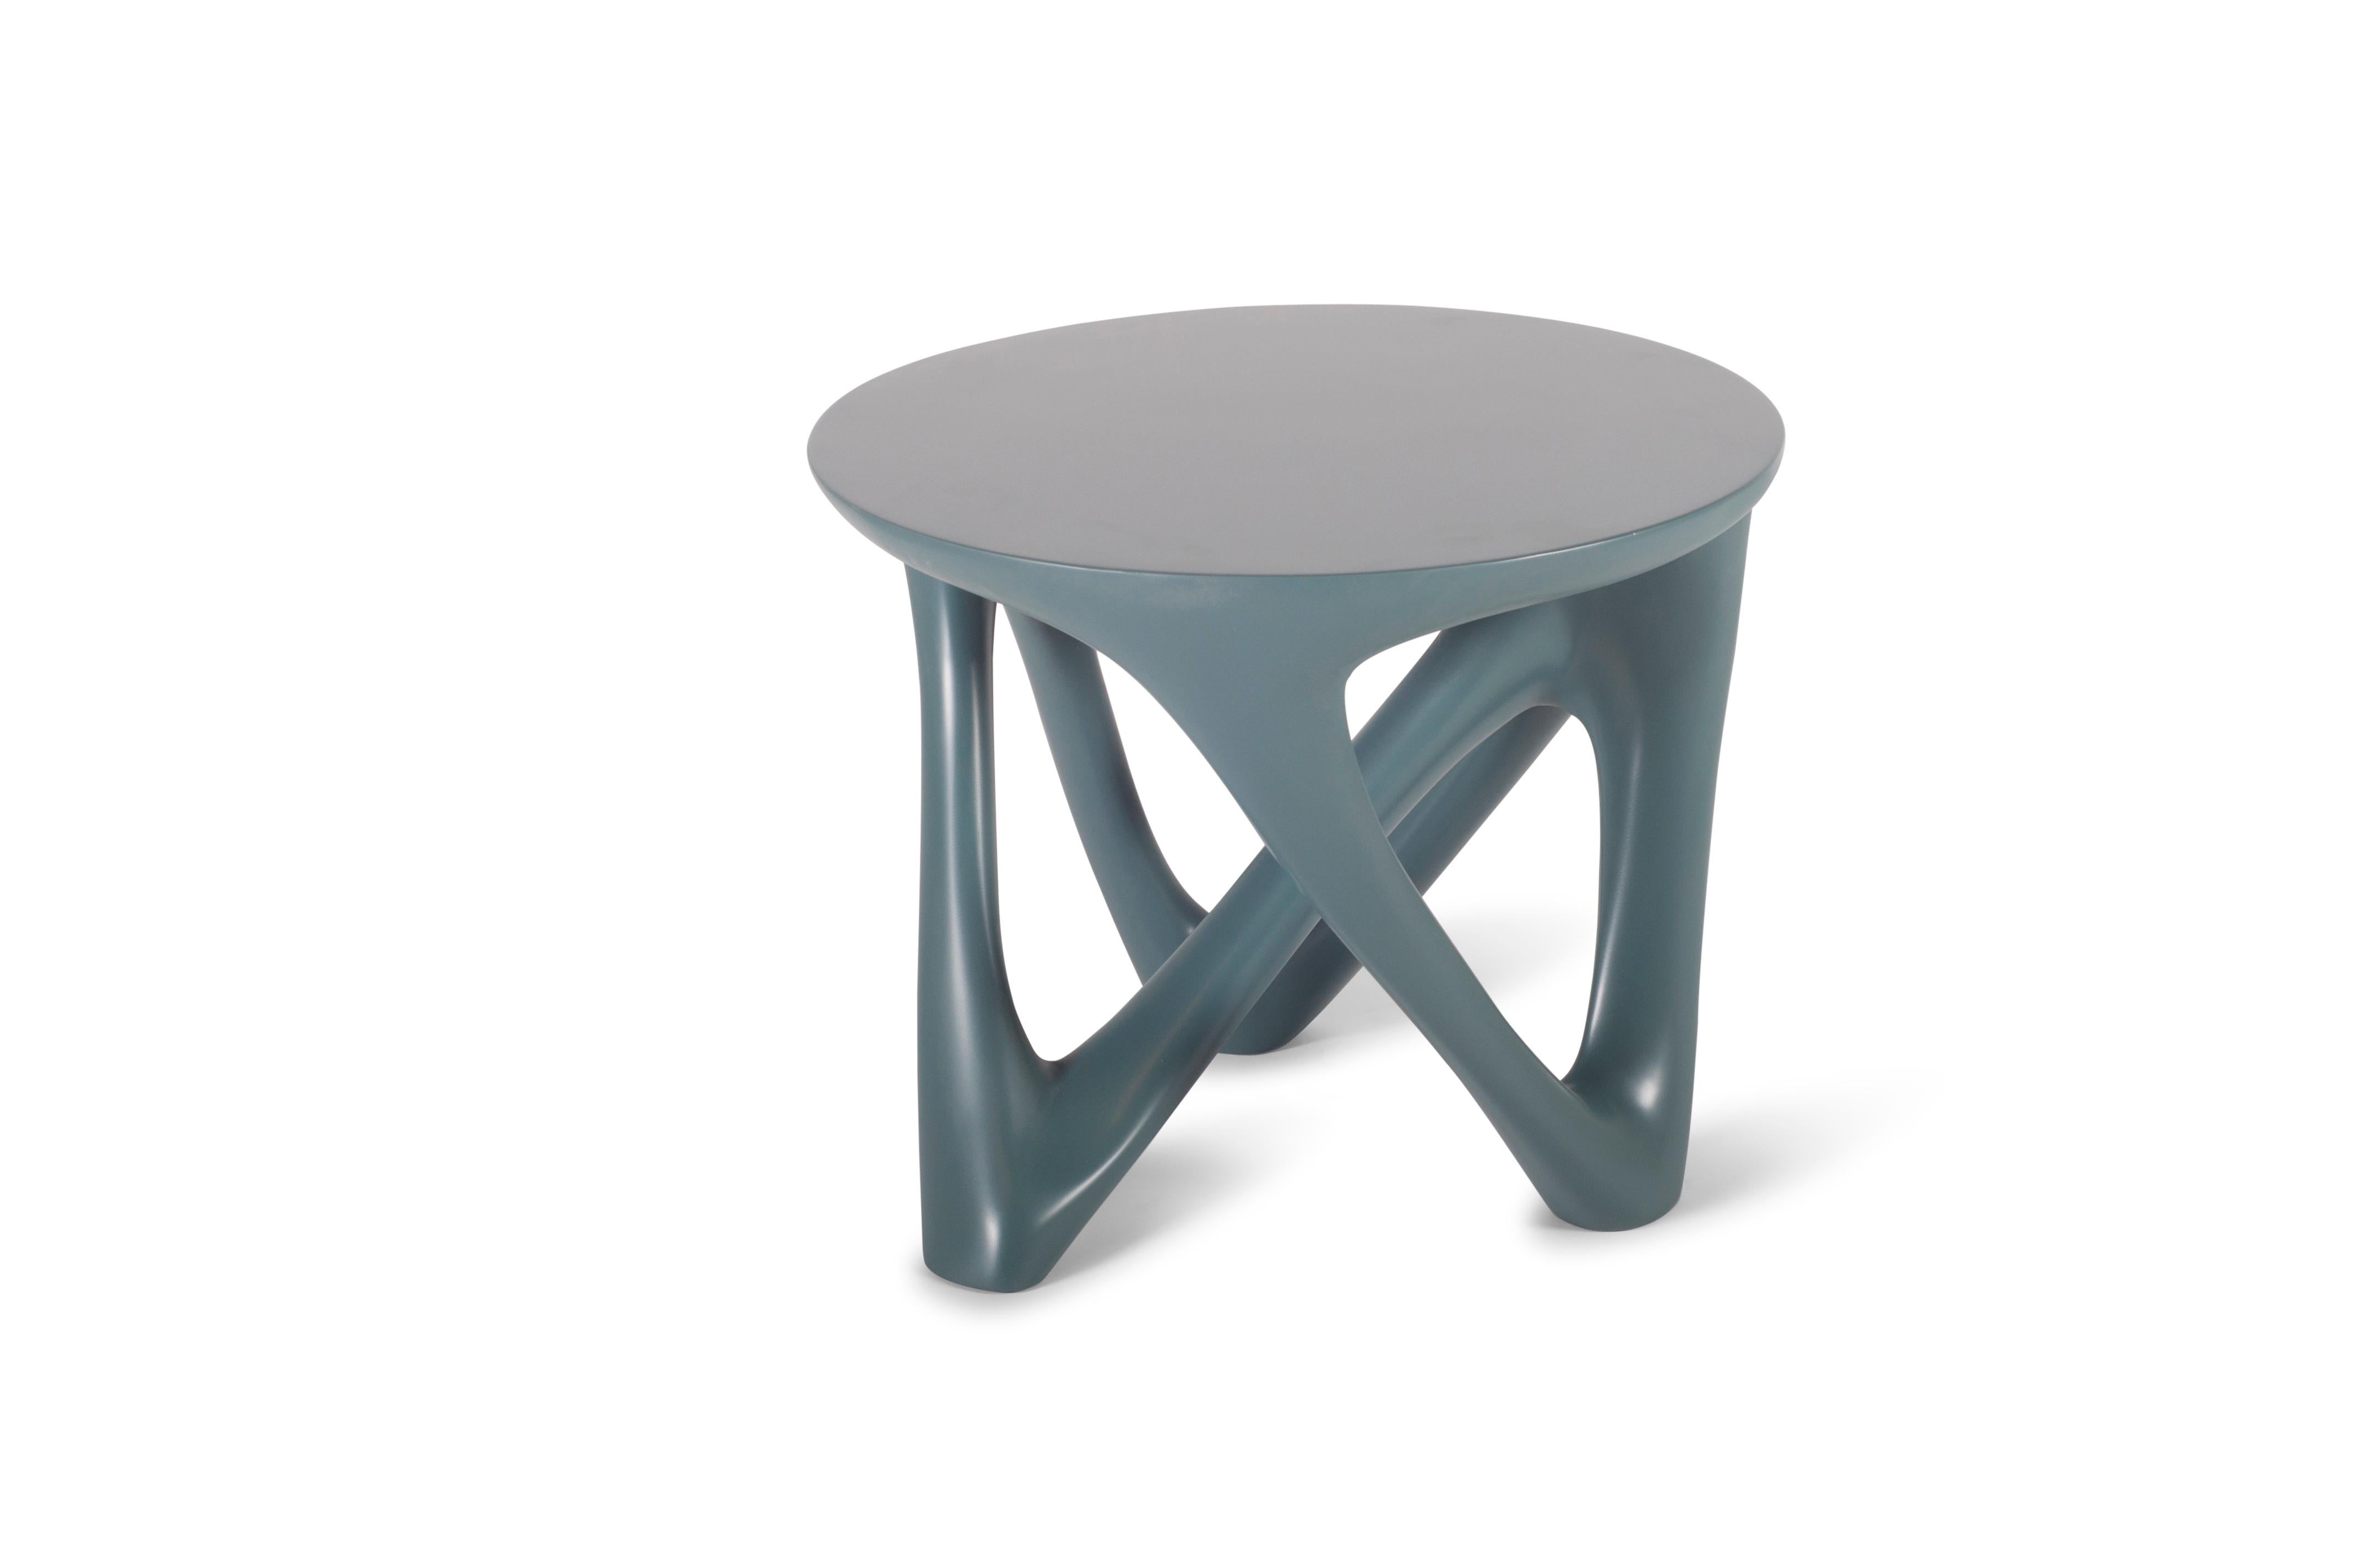 Organic Modern Amorph Ya Modern Side Table in Gray lacquer finish For Sale